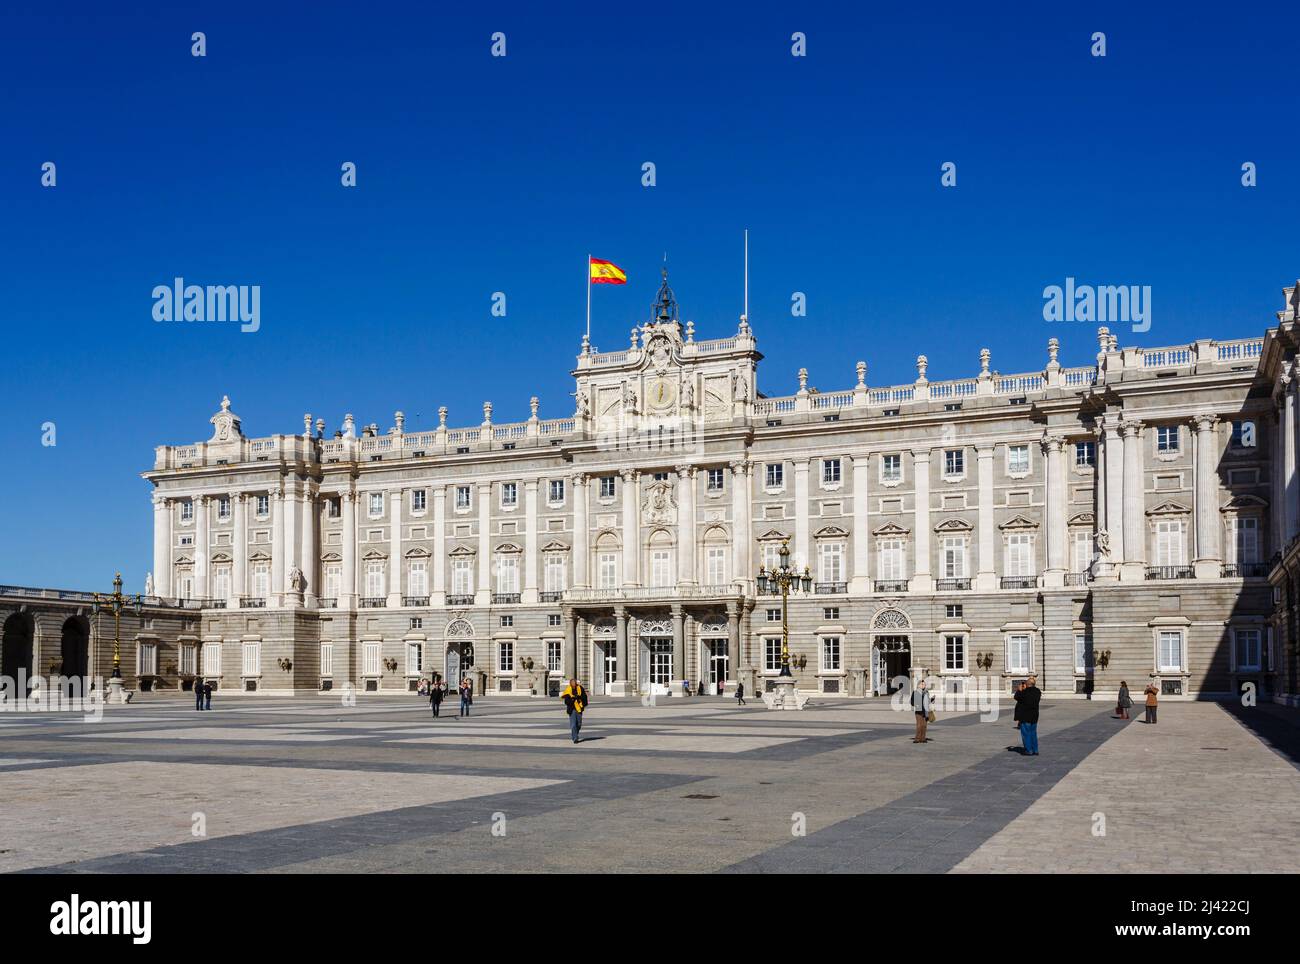 View from Plaza de la Armeria of the baroque architecture Royal Palace of Madrid (Palacio Real) in Madrid, capital city of Spain Stock Photo